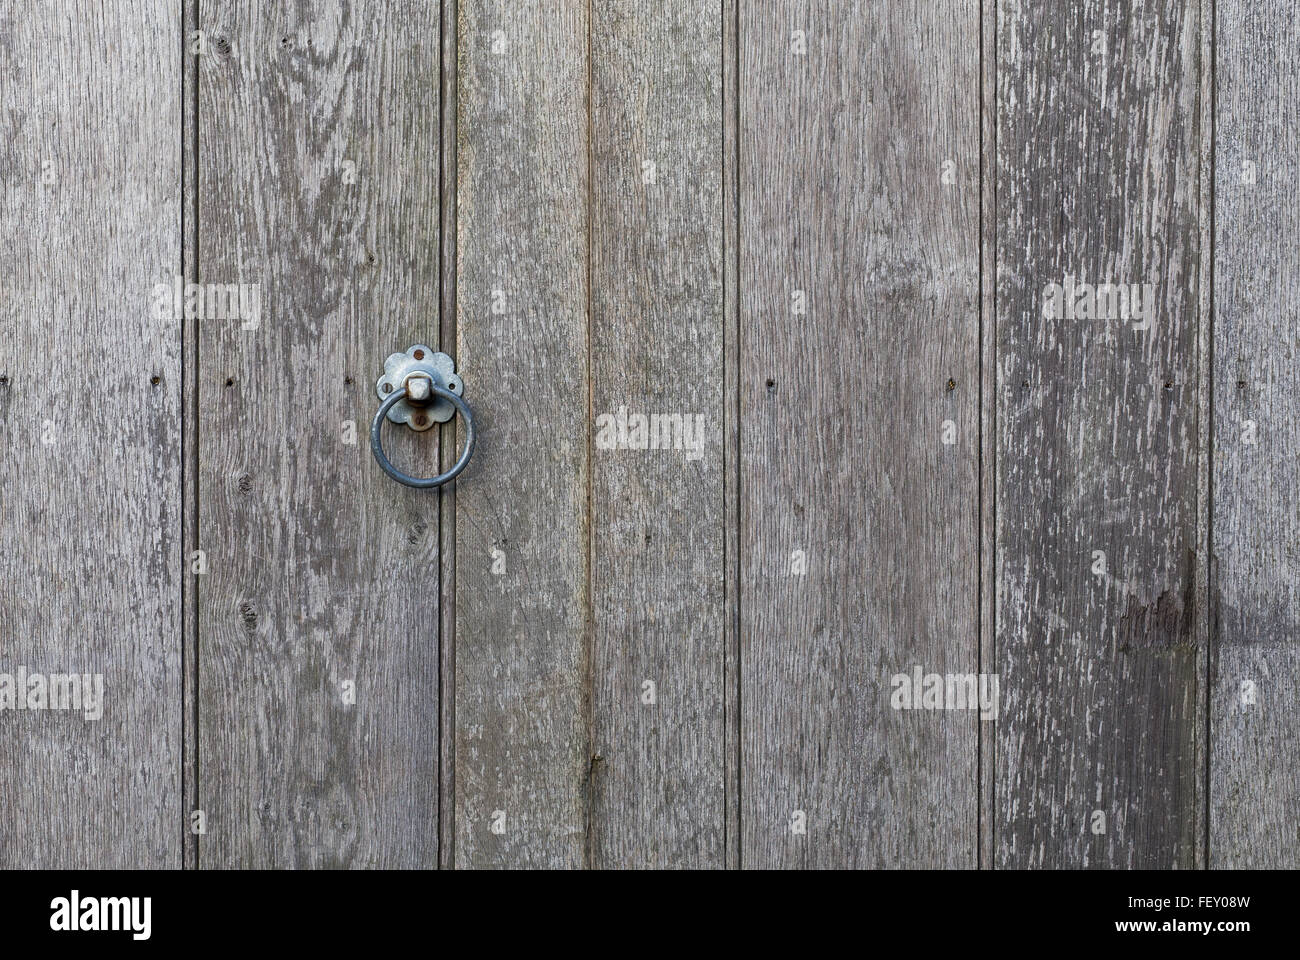 Old wooden fence door with metal ring, copy space Stock Photo